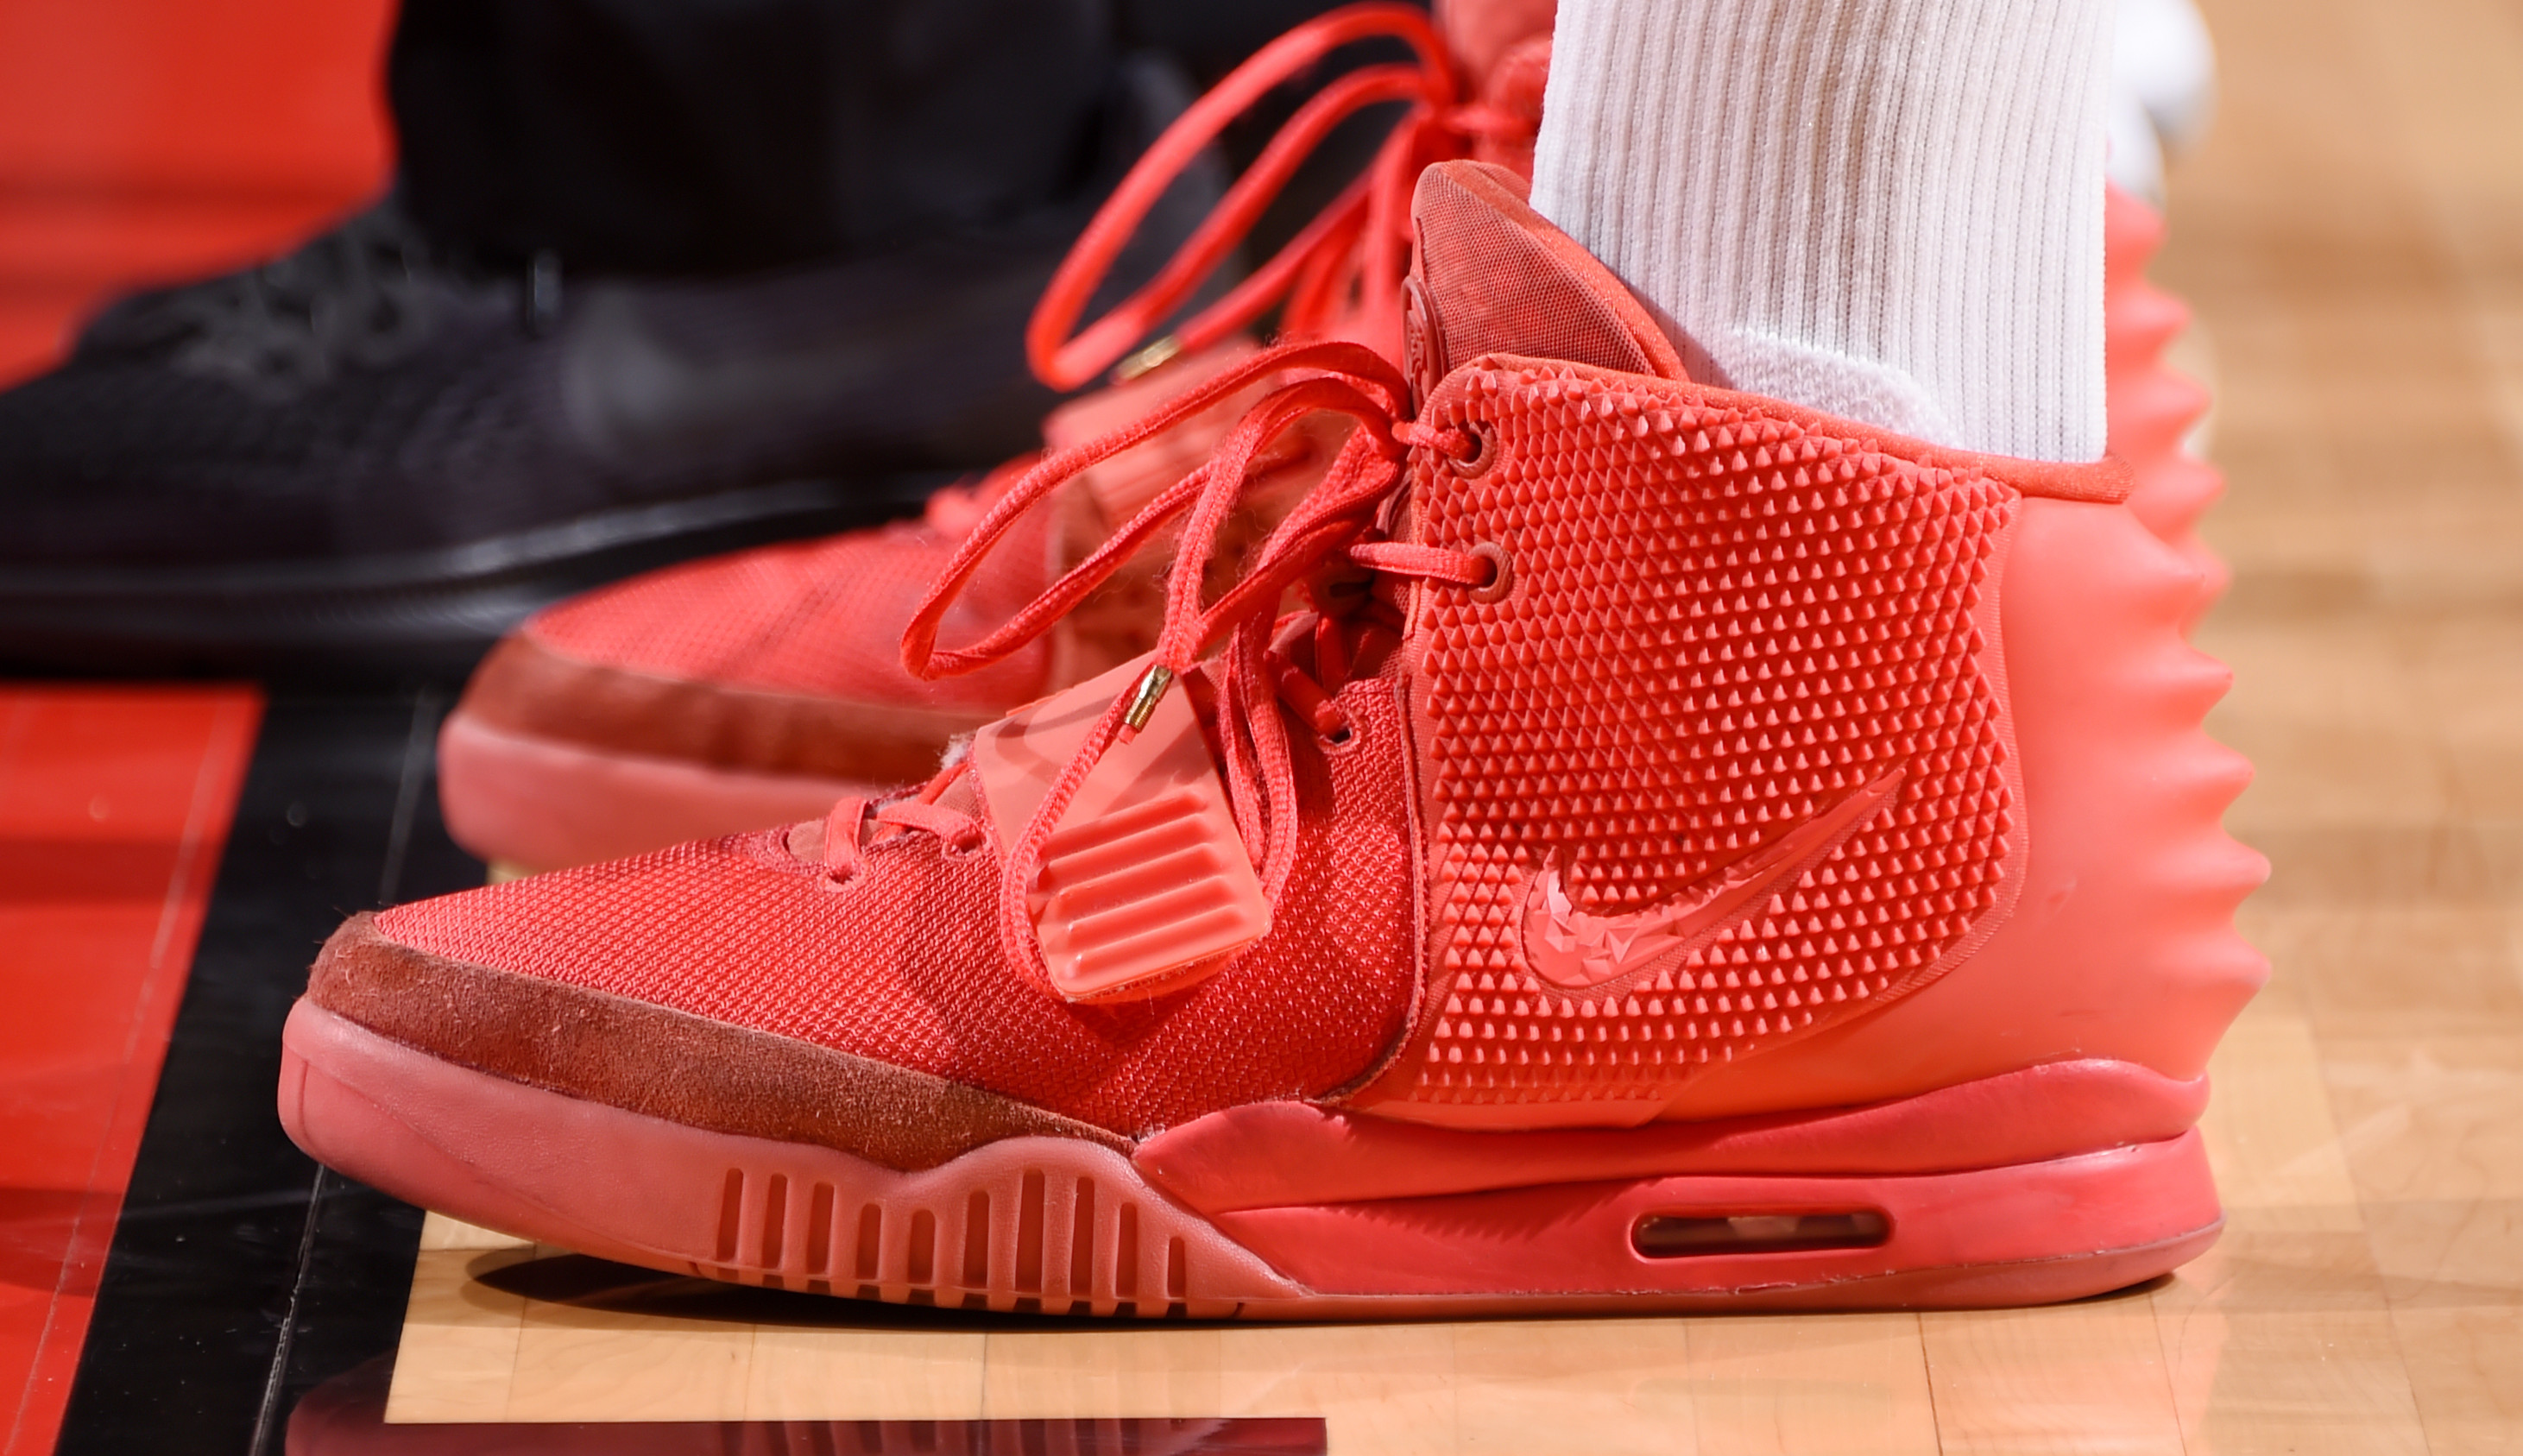 P.J. Tucker Nike Air Yeezy 2 Red October | Sole Collector